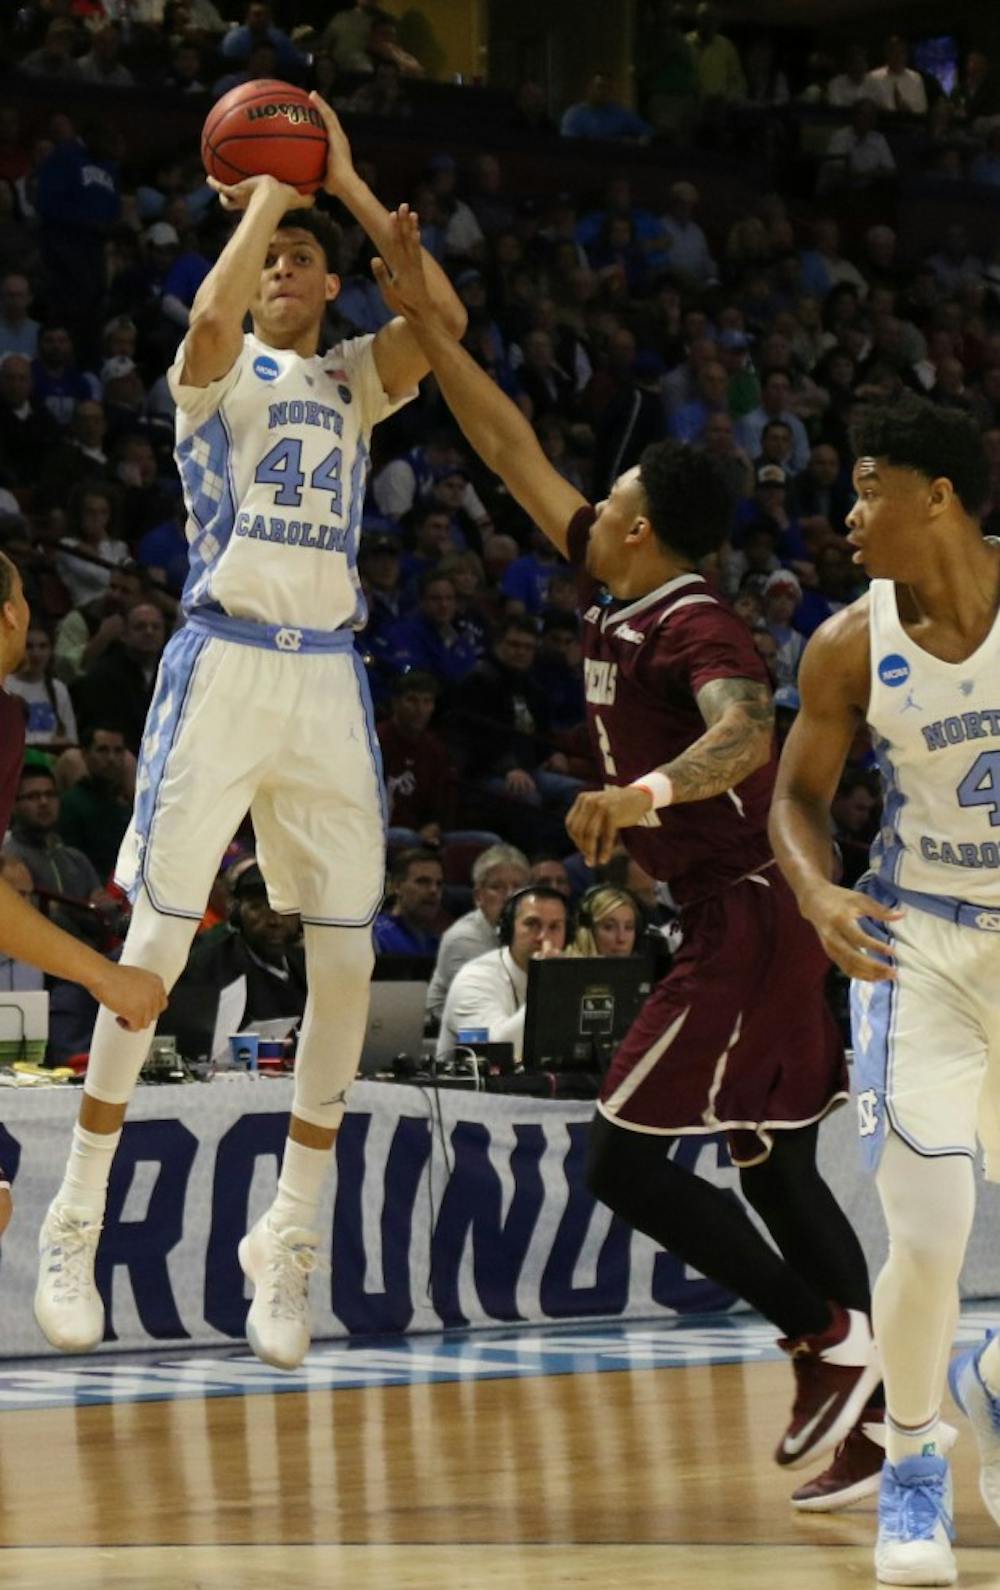 North Carolina wing Justin Jackson (44) pulls up for a three-pointer against Texas Southern in the first round of the NCAA Tournament in Greenville on Friday.